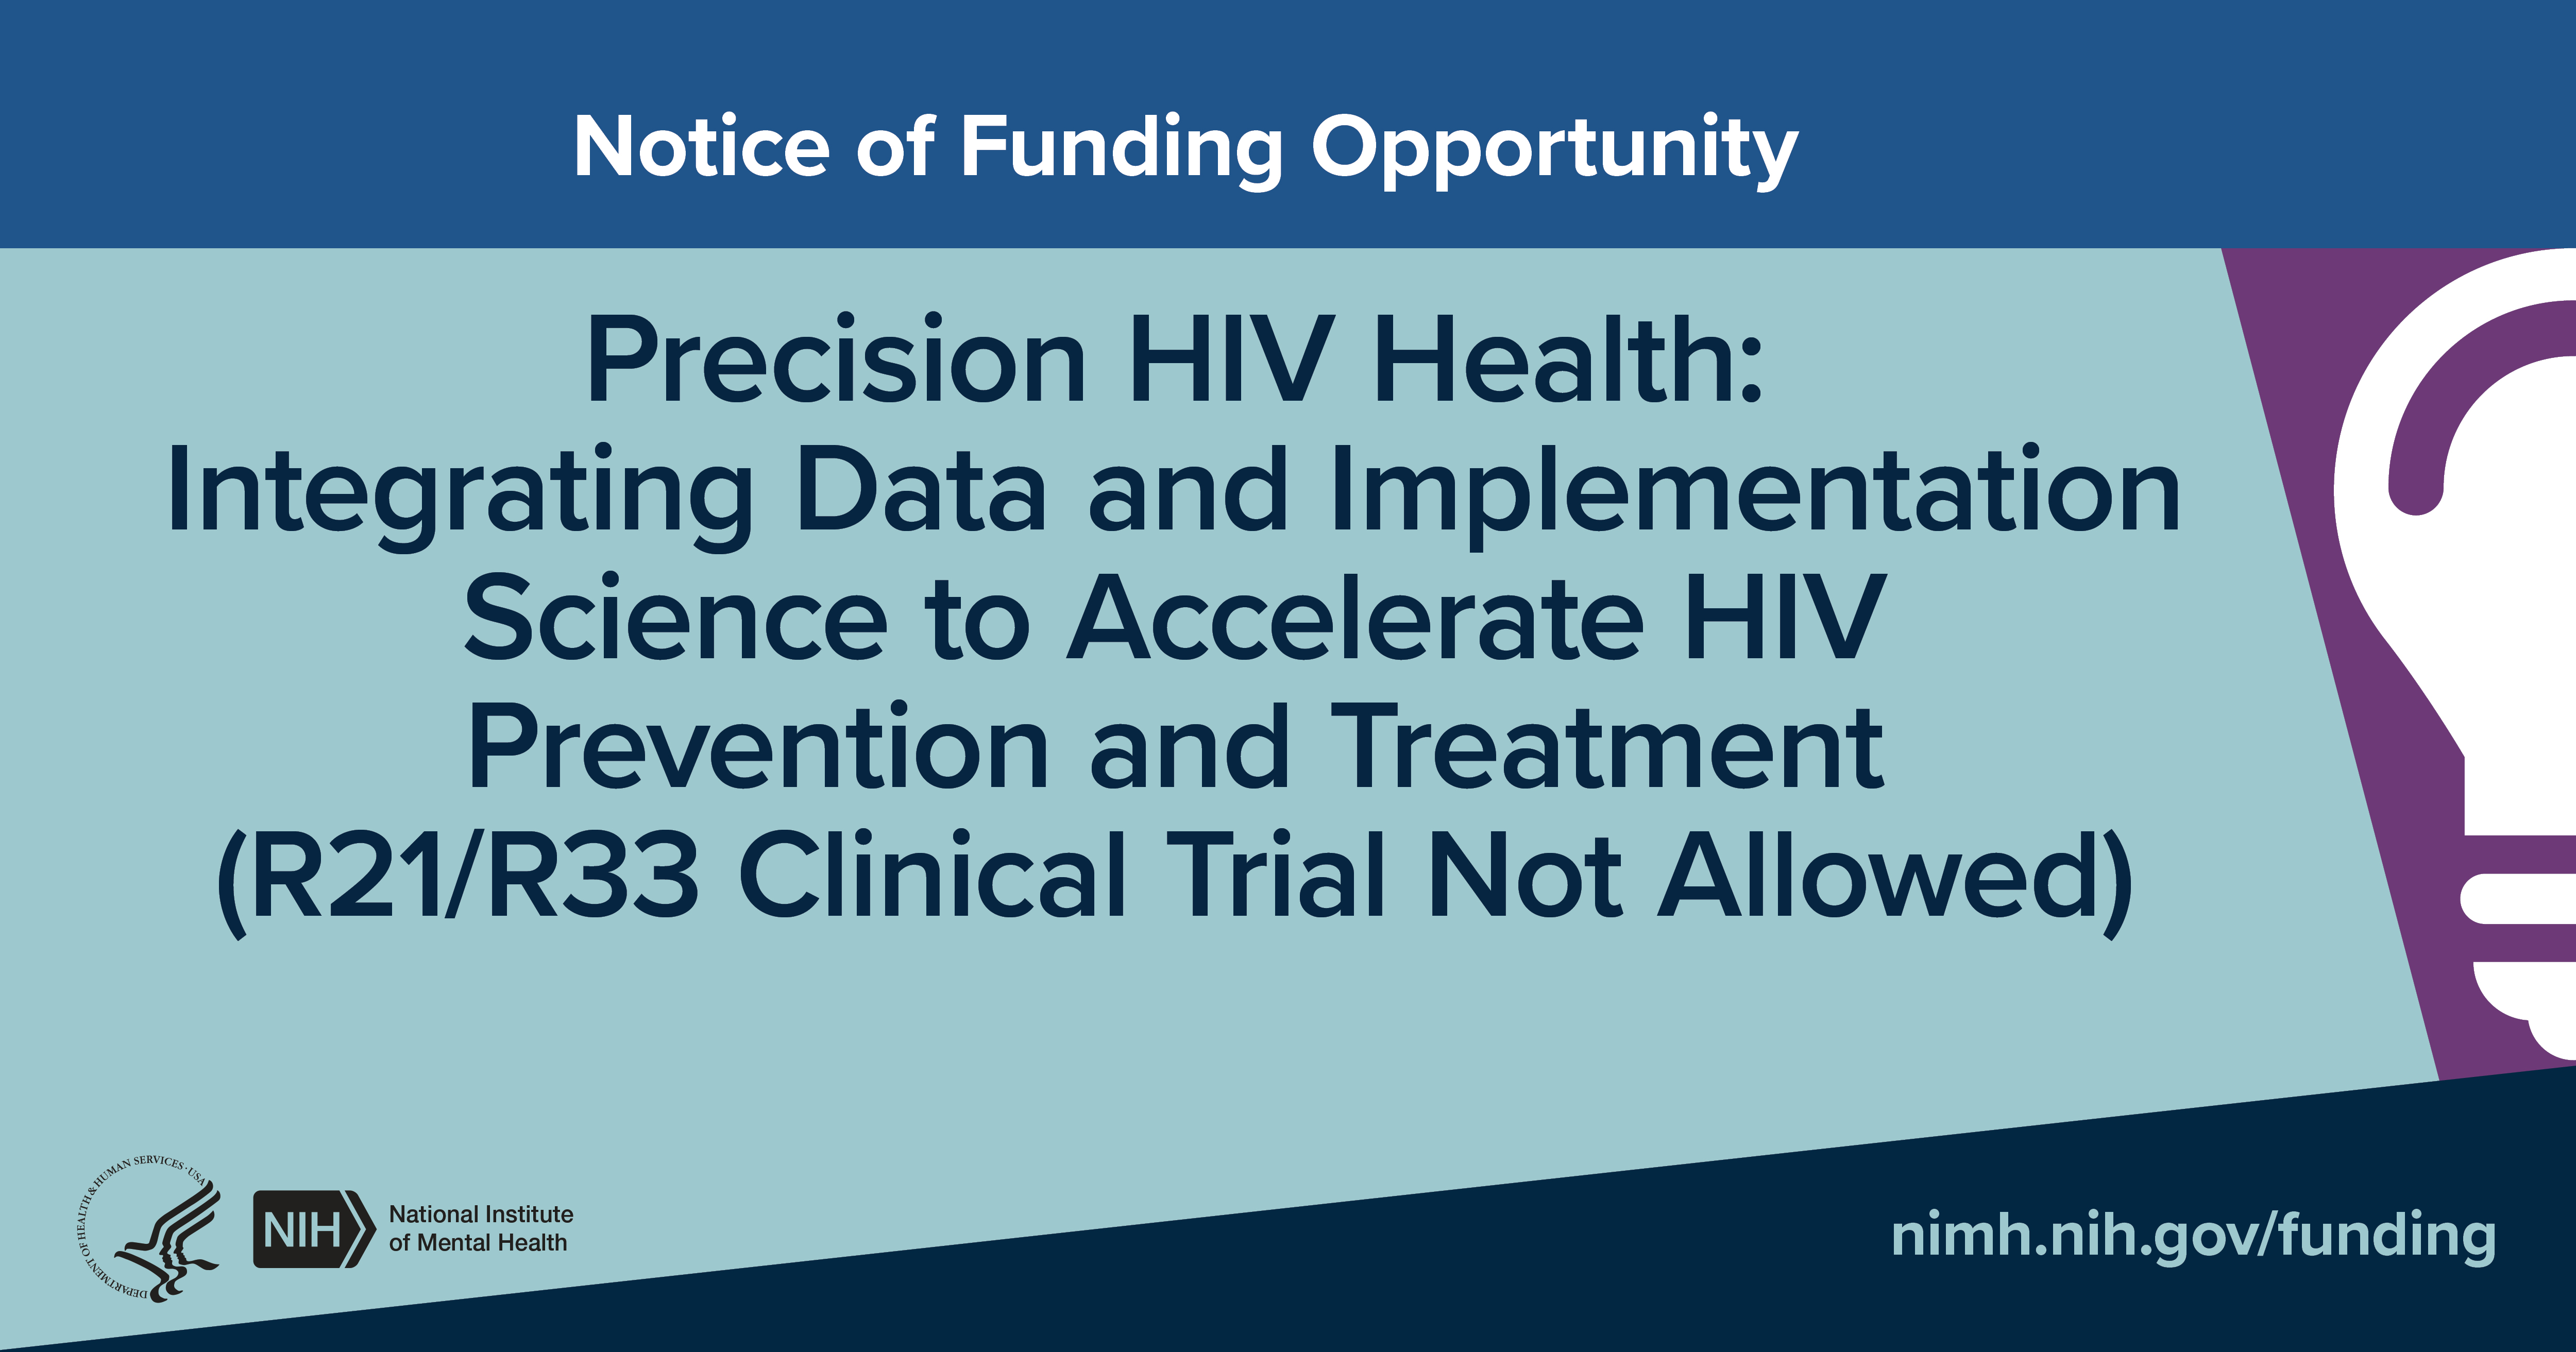 Integrating Information and Implementation Science to Speed up HIV Prevention and Therapy (R21/R33 Medical Trial Not Allowed)